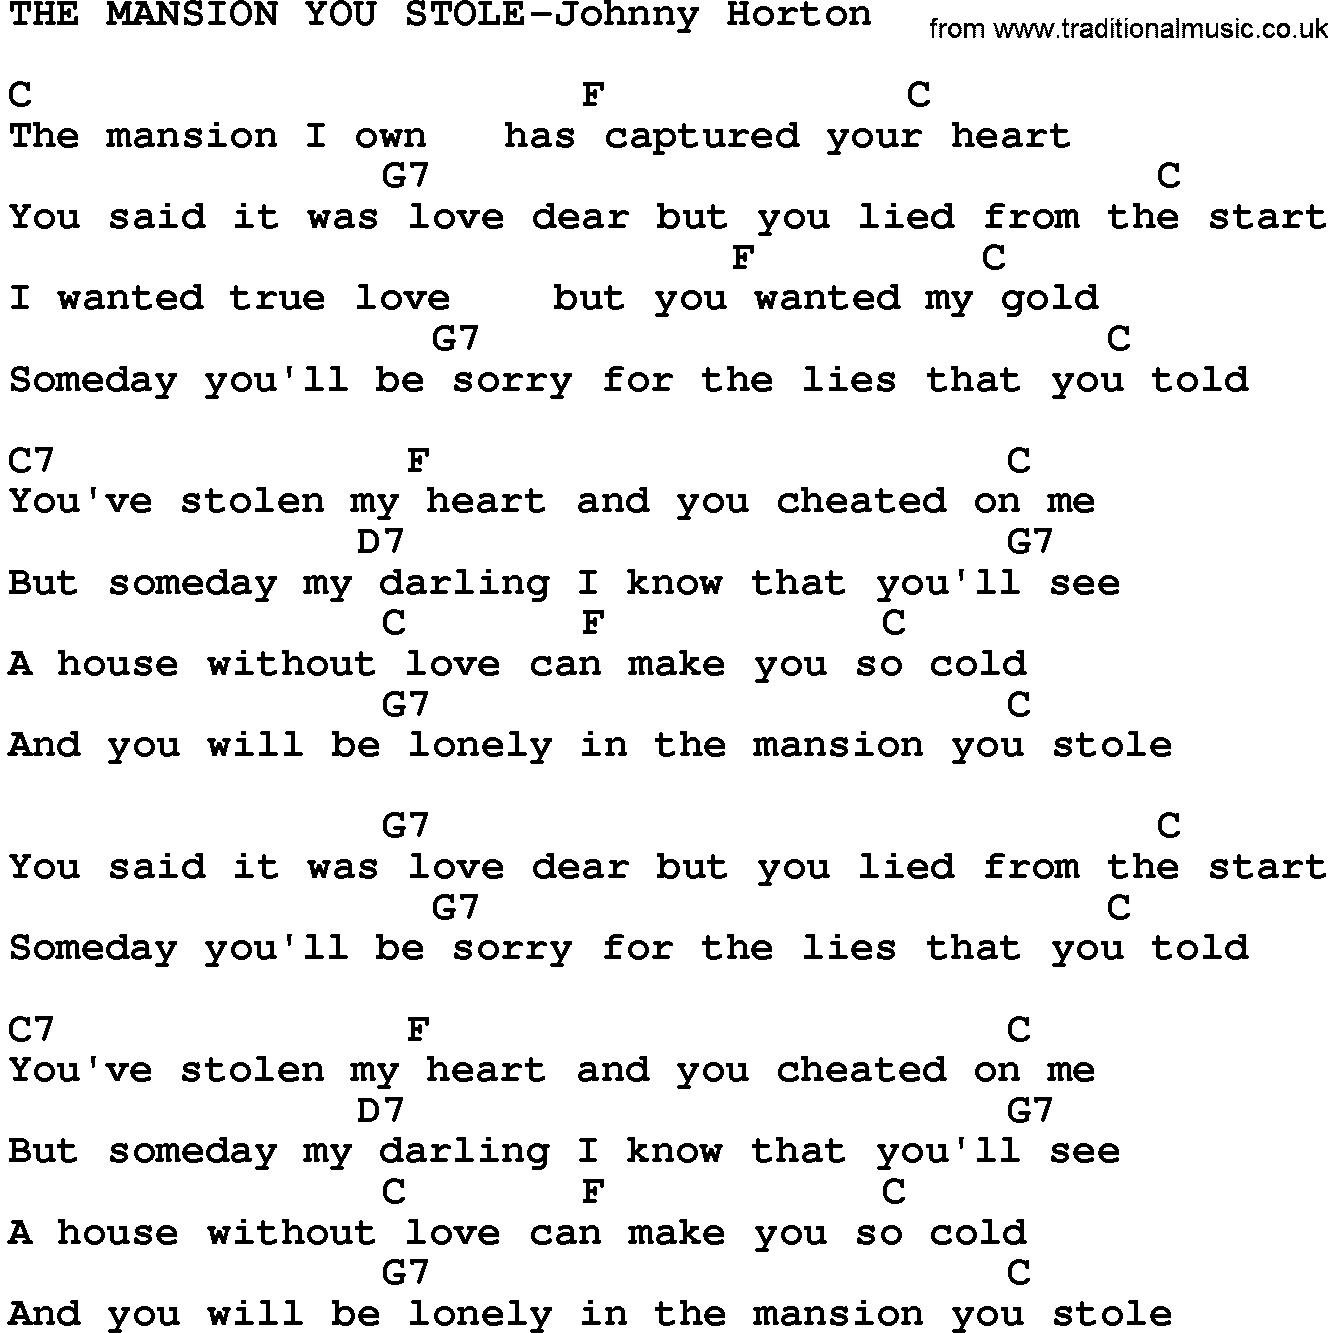 Country music song: The Mansion You Stole-Johnny Horton lyrics and chords